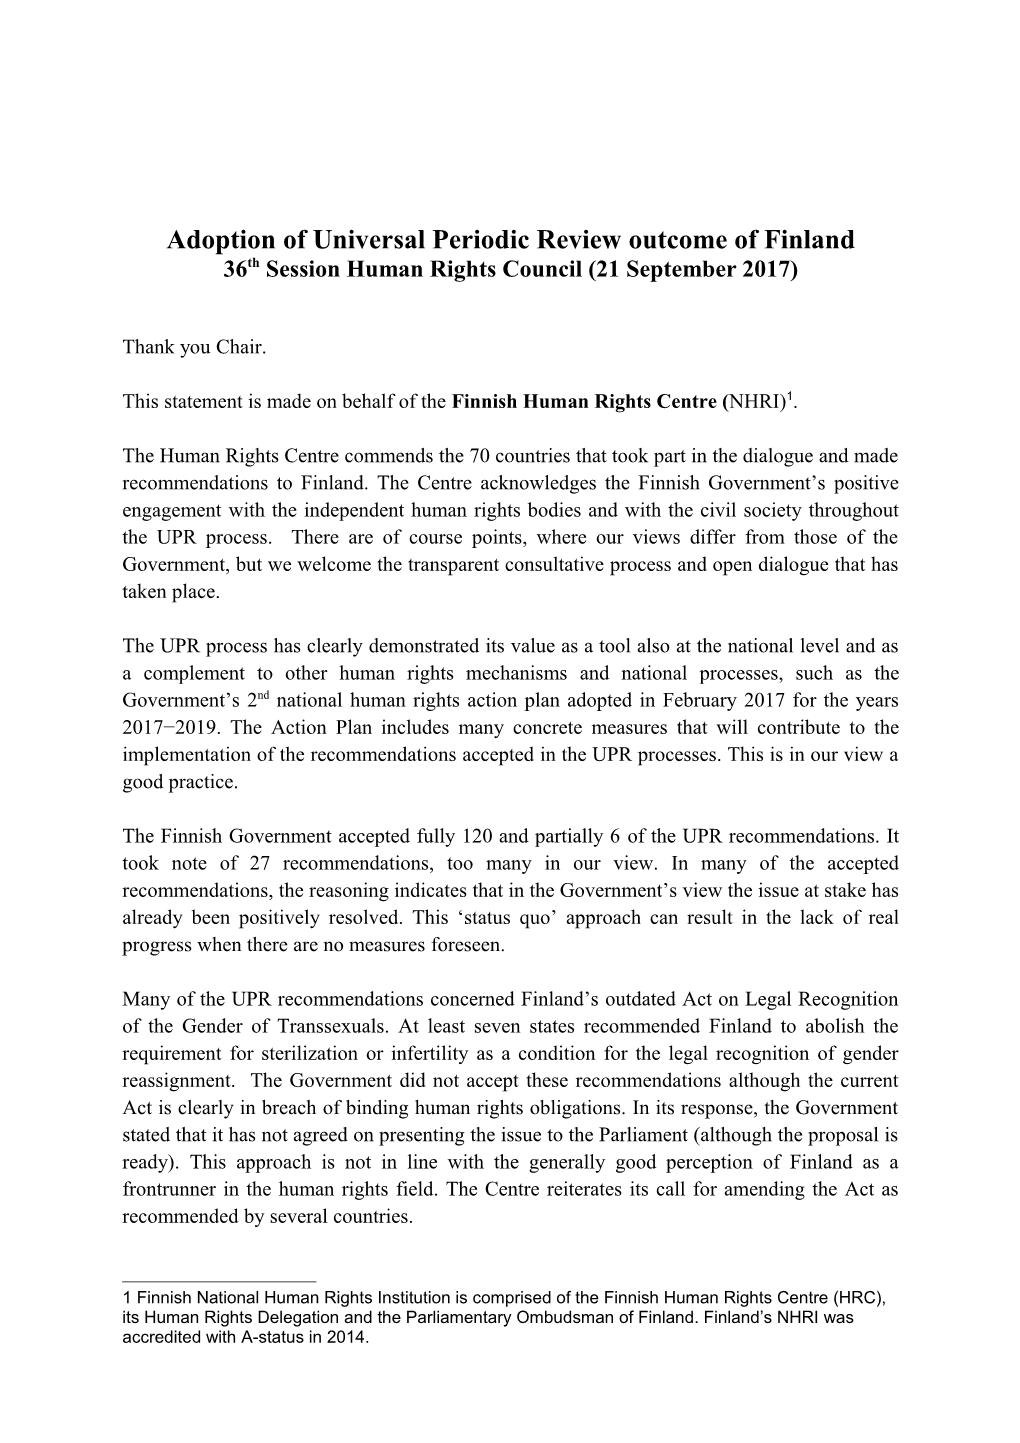 This Statement Is Made on Behalf of the Finnish Human Rights Centre ( NHRI) 1